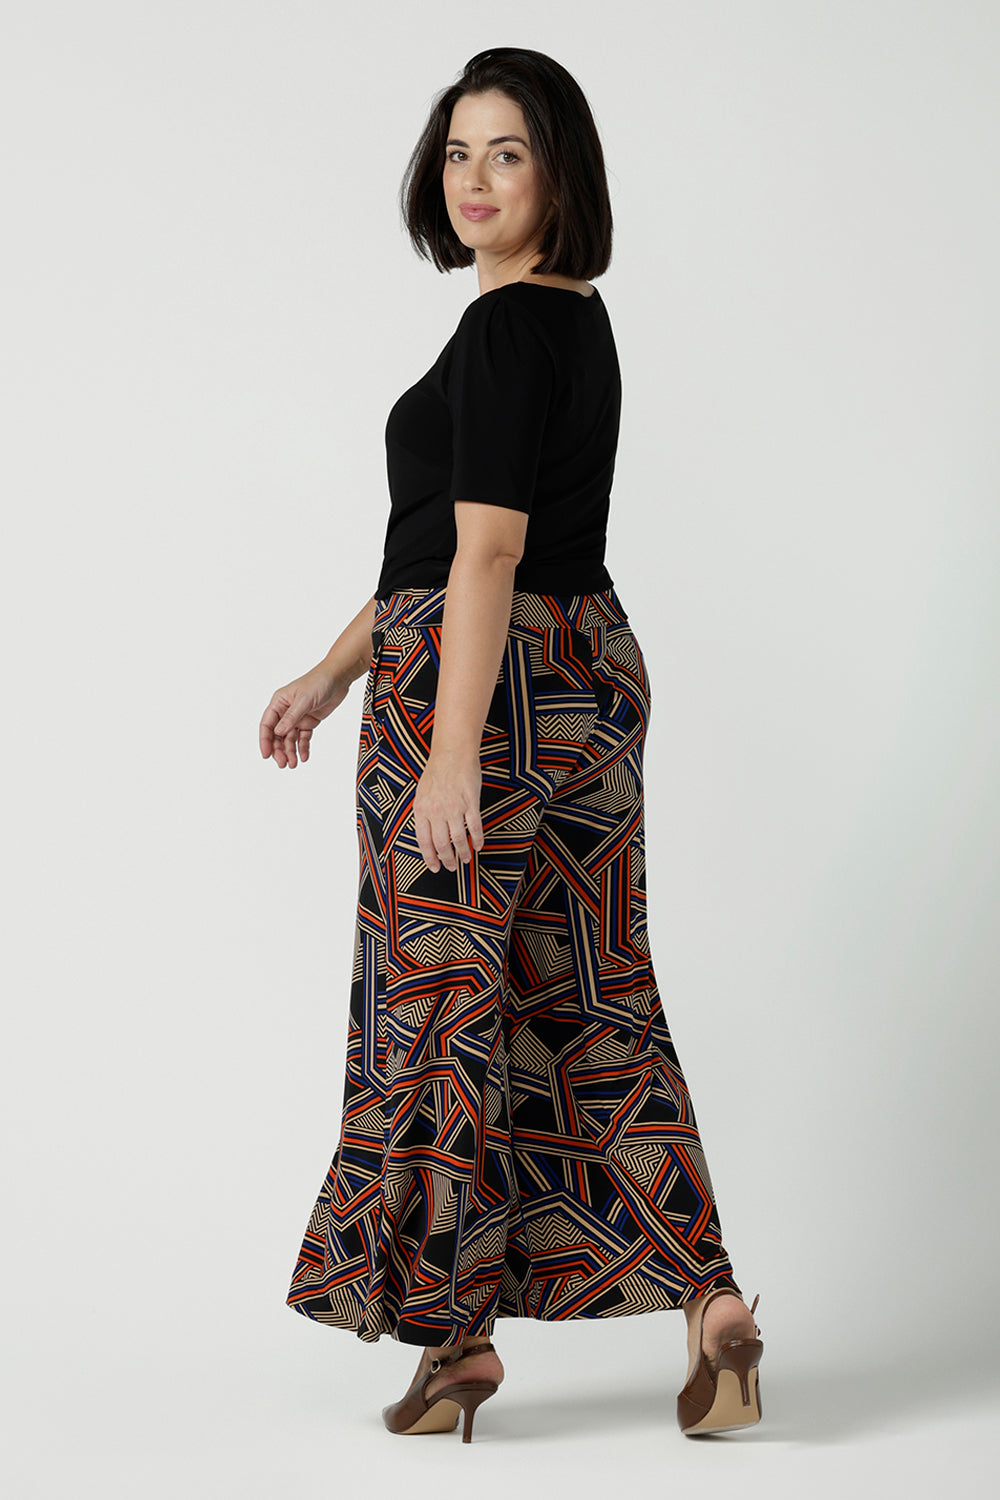 Back view of a size 10 woman wearing the Dany Culotte in Trixie, a printed Jersey work pant with a geometric pattern. Wide leg with functional pockets and wide waistband. Cropped length and petite height friendly. Made in Australia for women size 8 - 24.